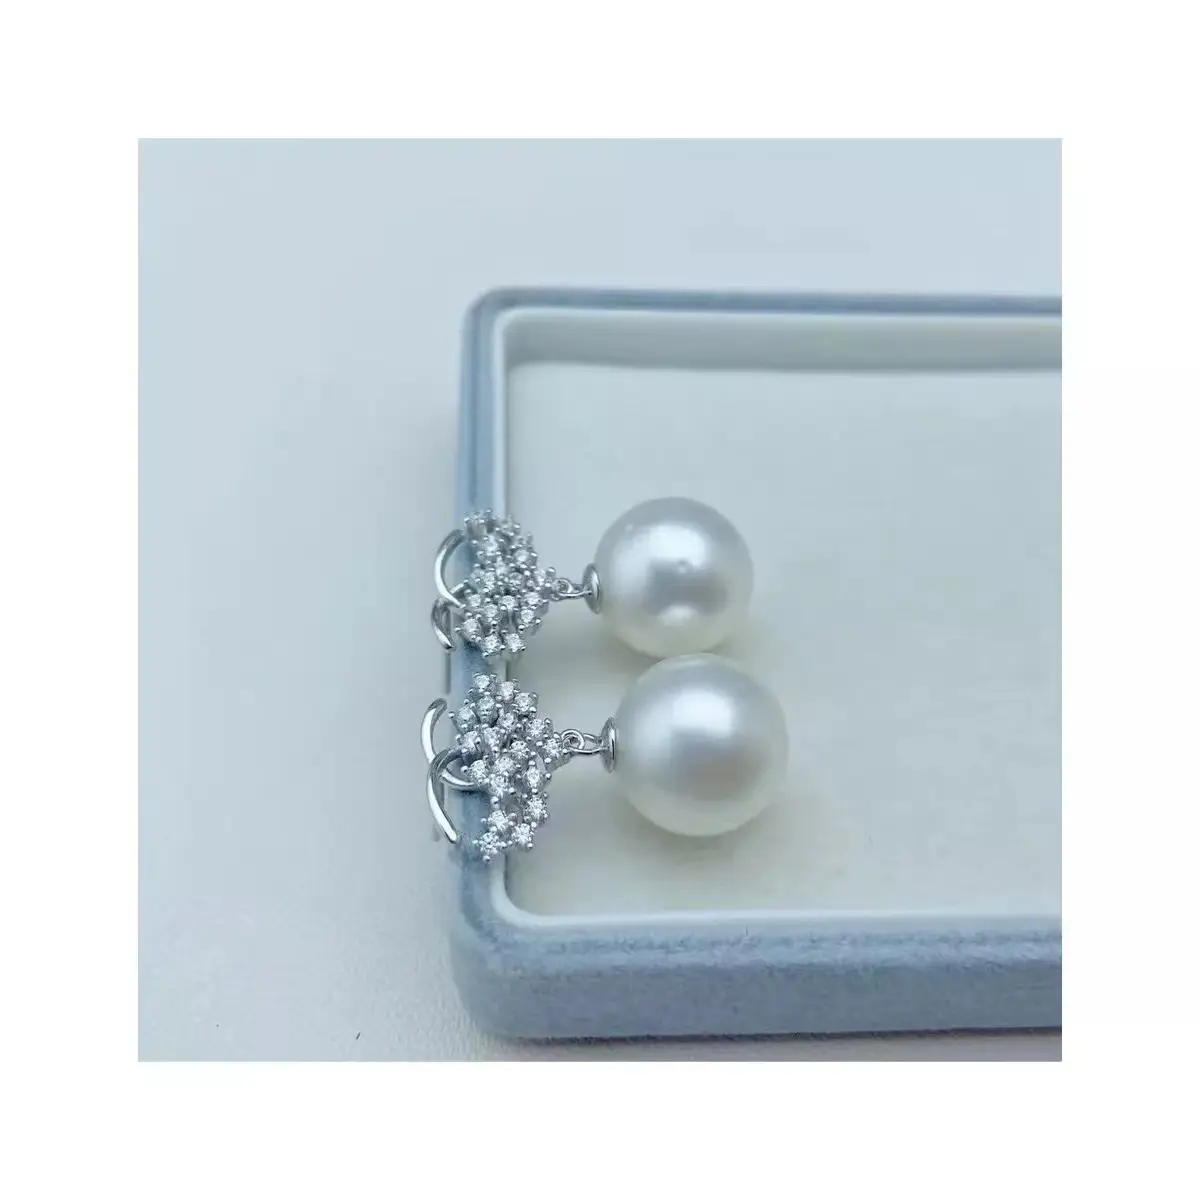 Micro-inlaid Zircon Small Fresh Ear Jewelry Natural Freshwater Pearl S925 Silver Stud Earrings